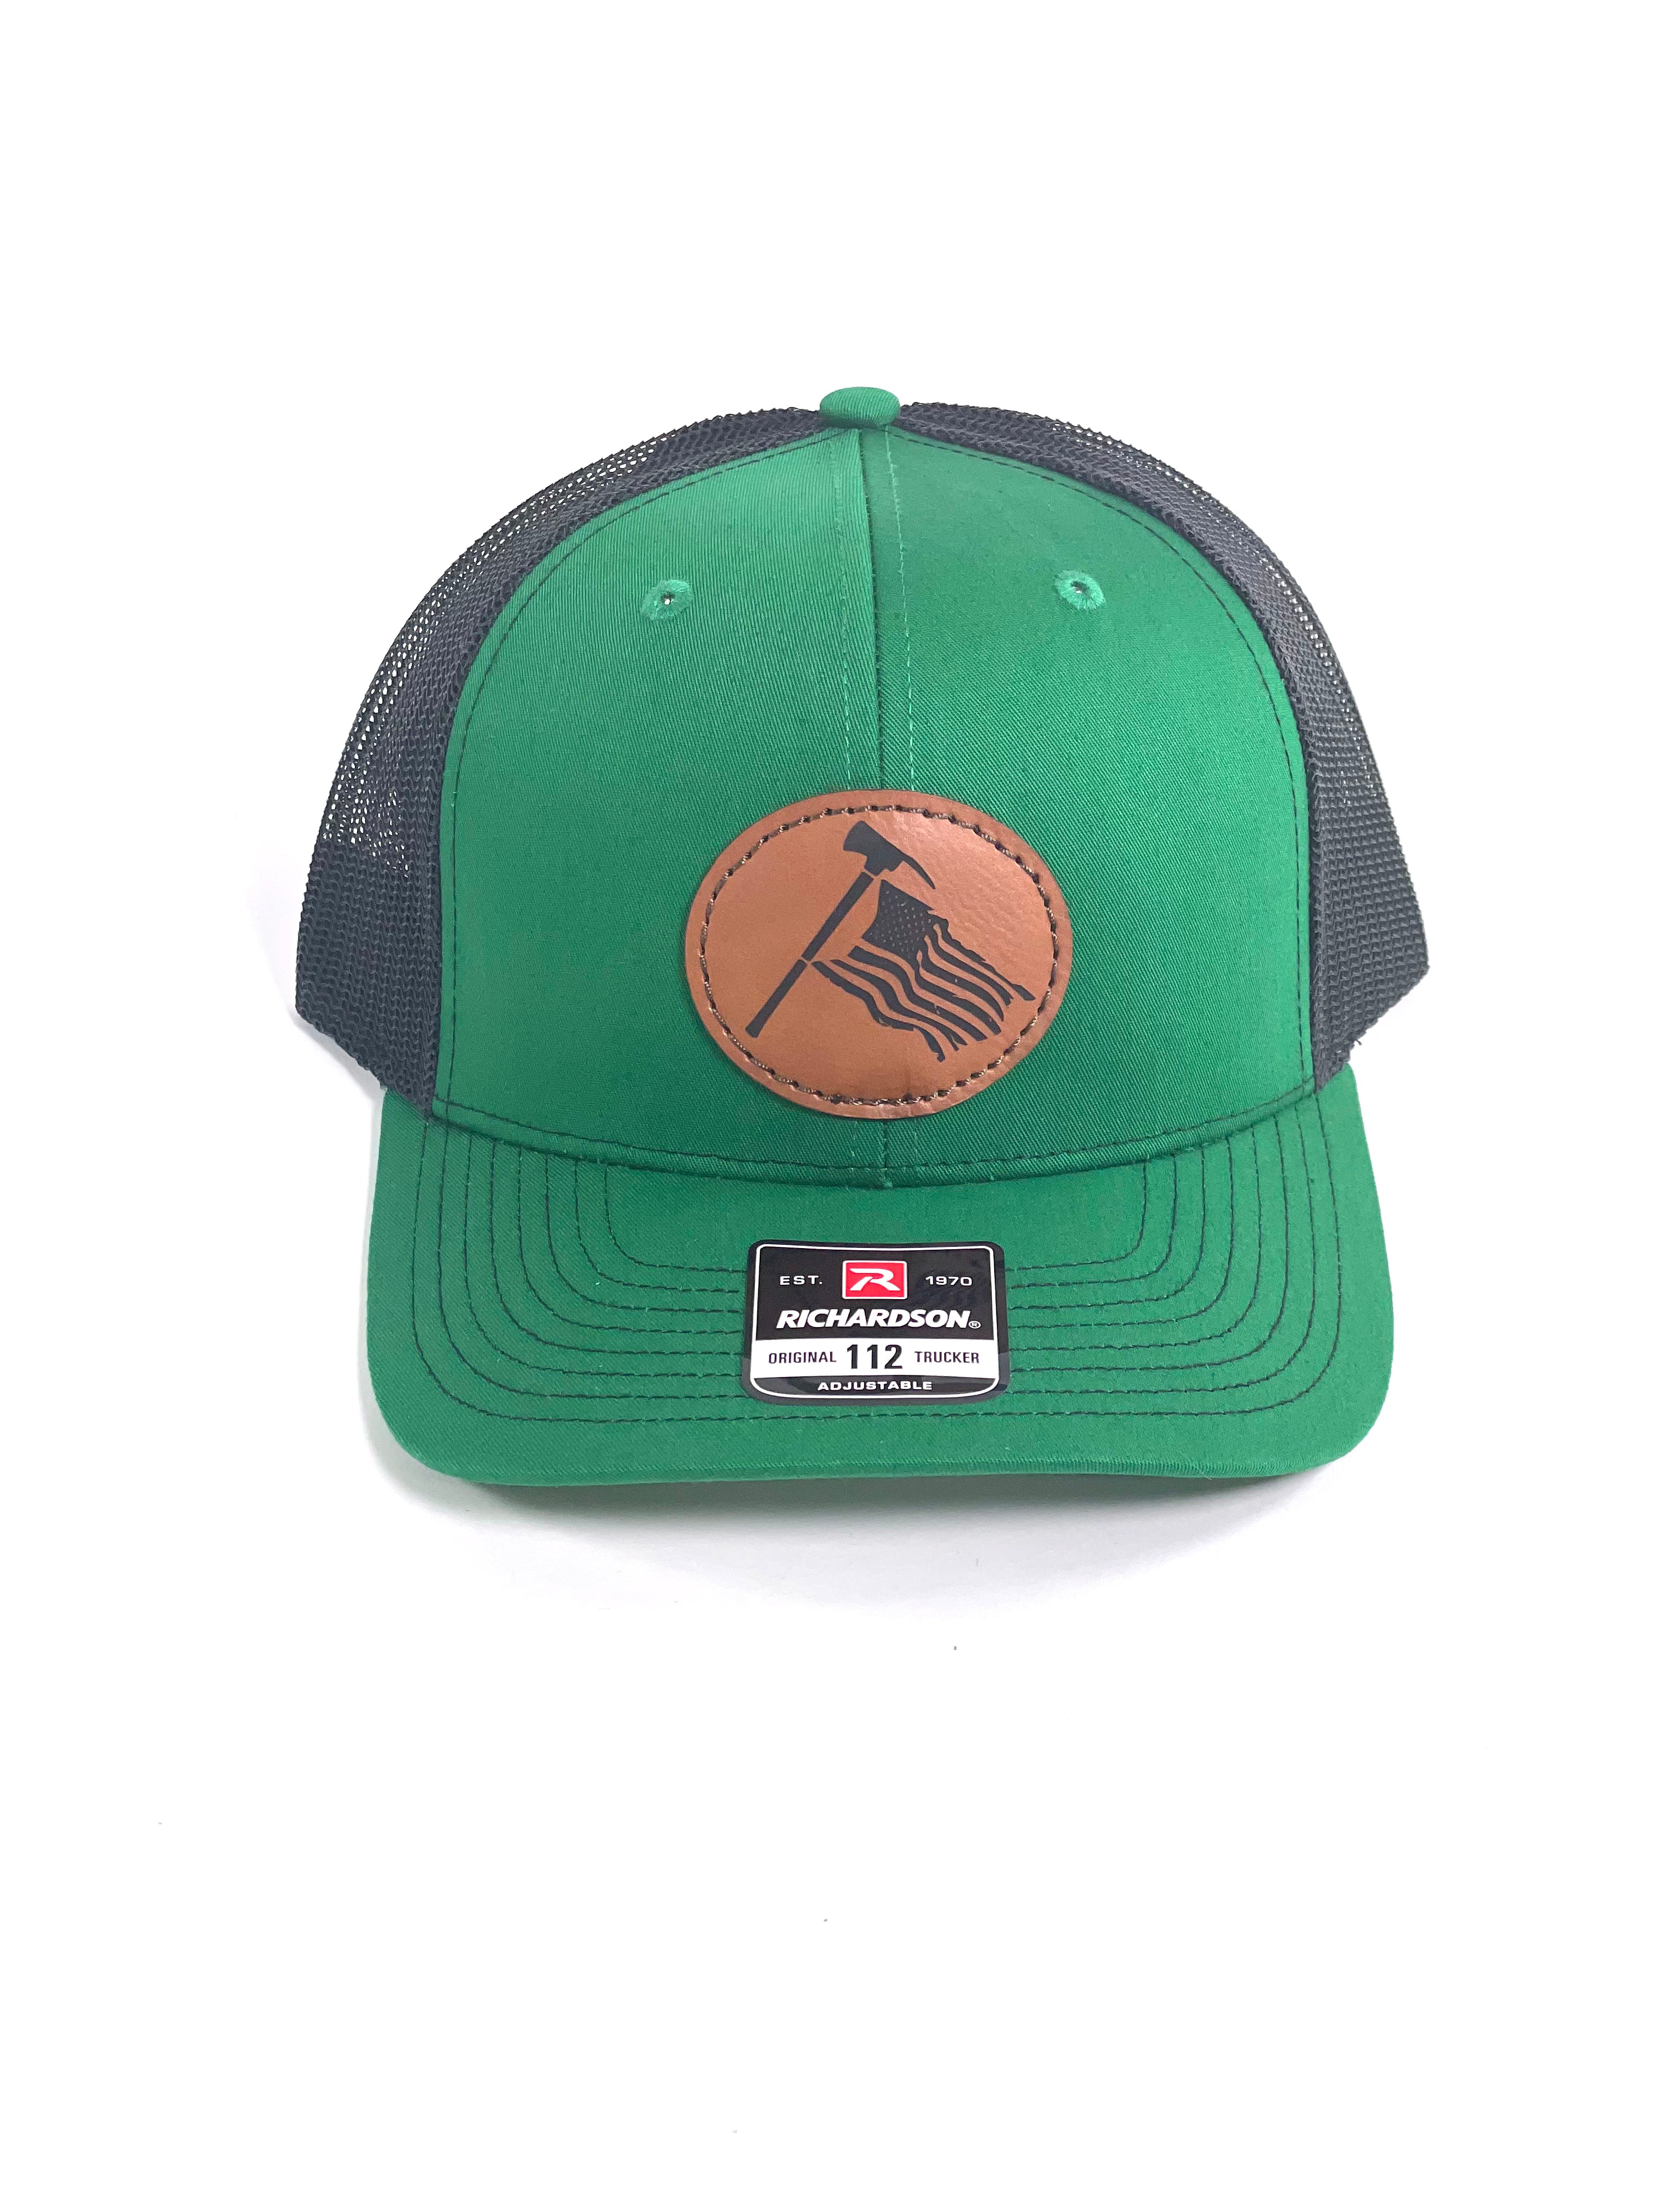 OLD GLORY LEATHER - BLACK/GREEN SNAPBACK/CURVED BILL